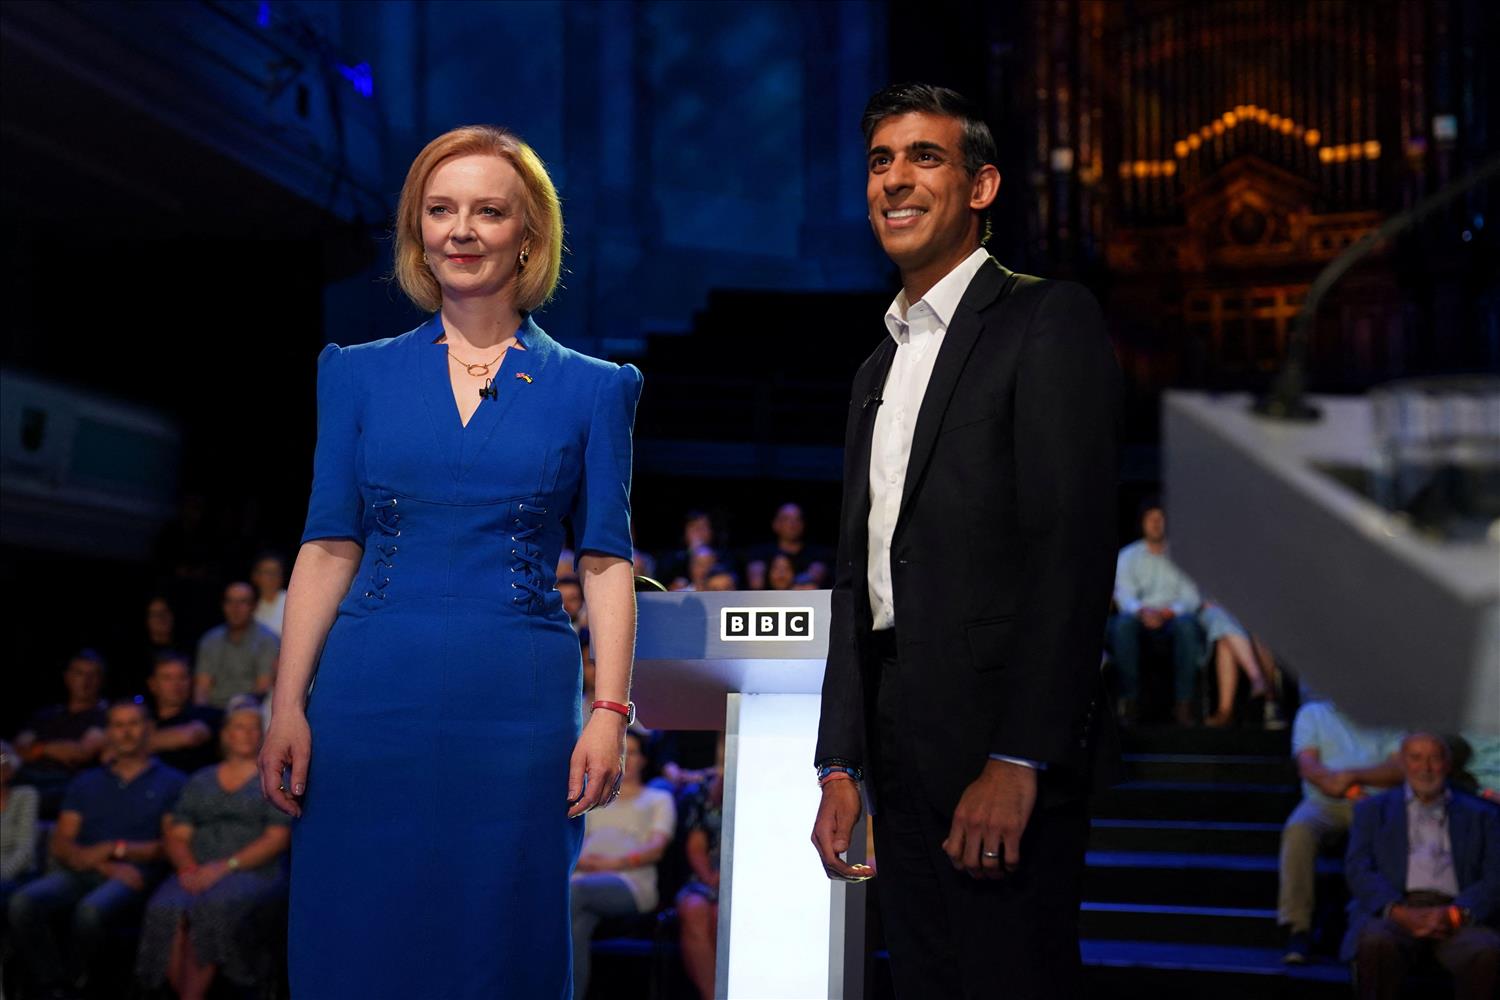 Rishi Sunak Is More Authentic And Emotional, And Liz Truss More Analytical: A Linguistic Analysis Throws Up Unexpected Results